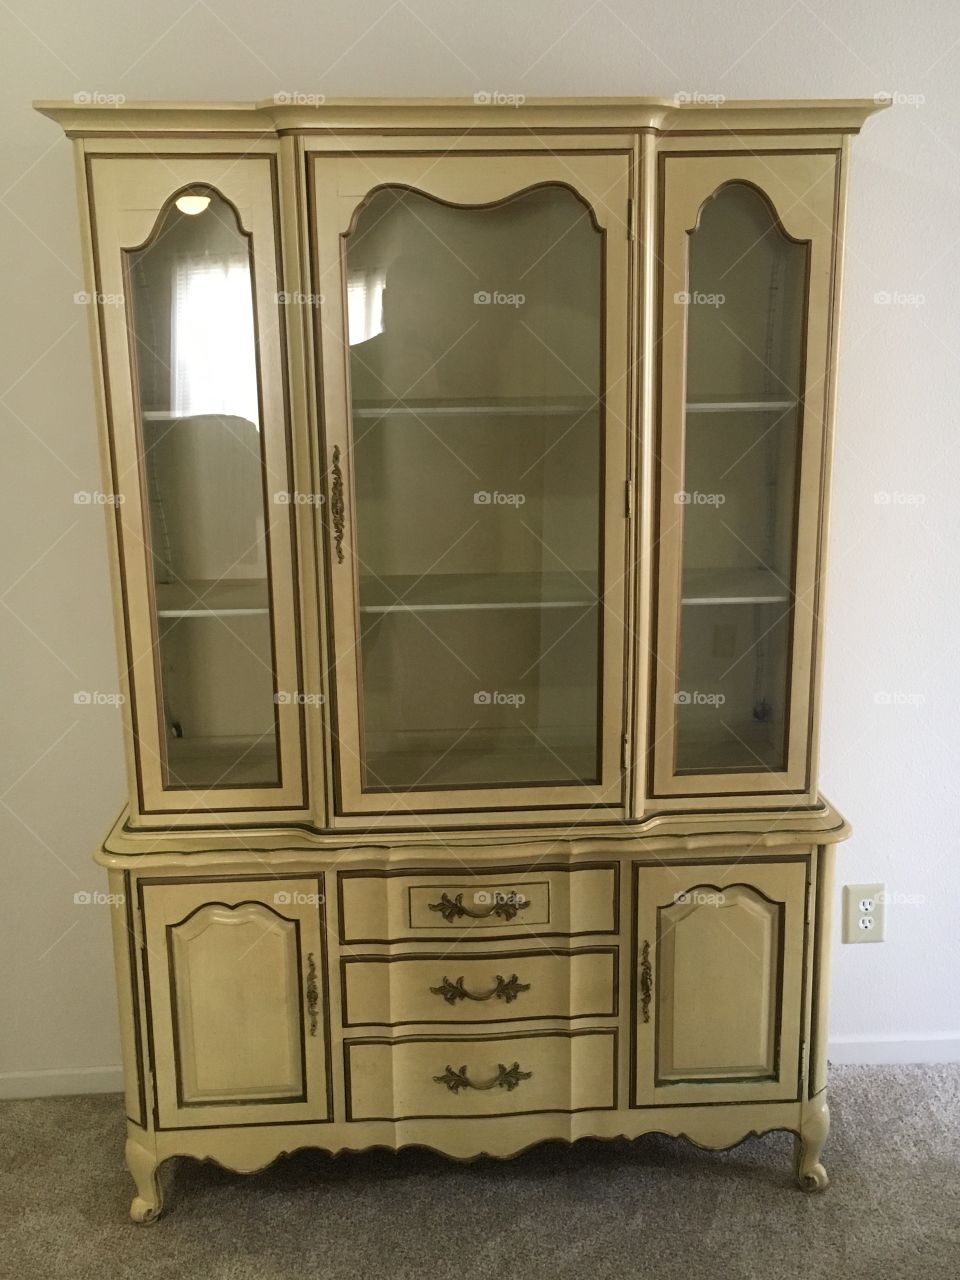 Antique hutch barren of any decoration